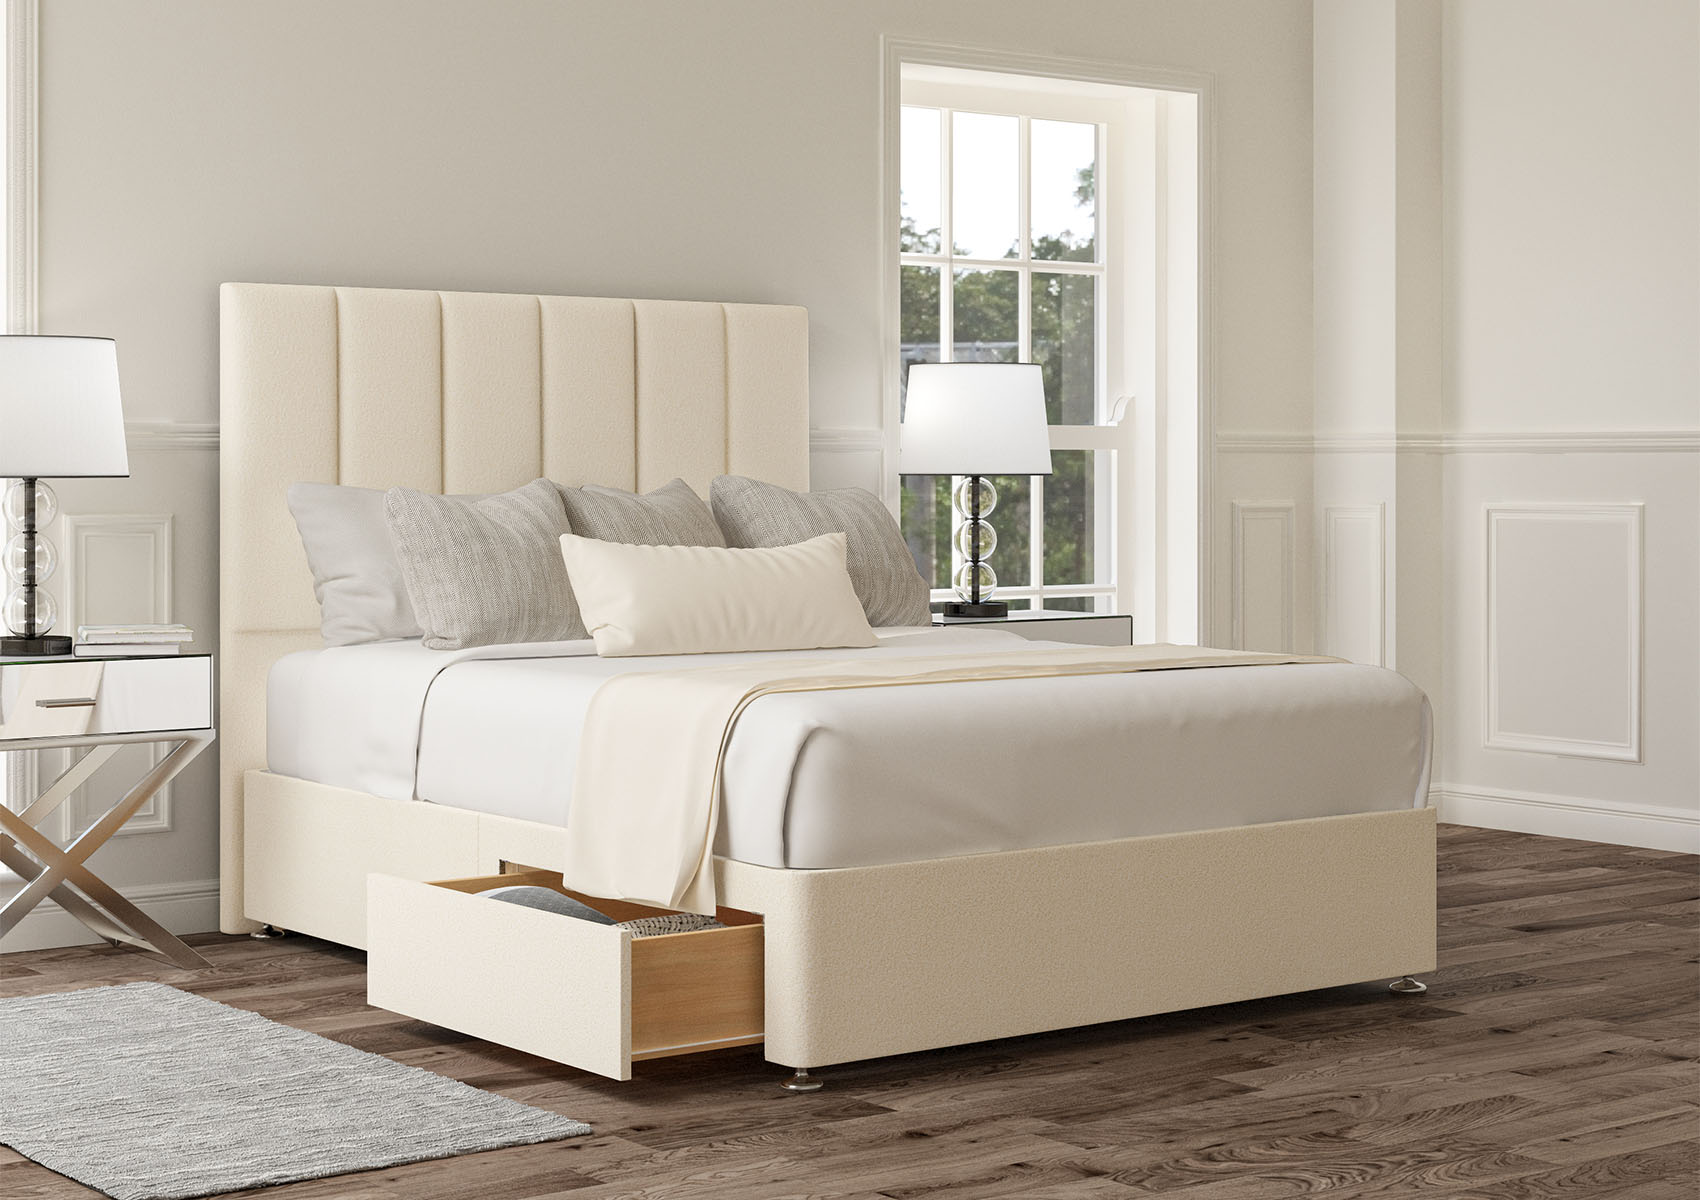 View Empire Heritage Steel Upholstered King Size Divan Bed Time4Sleep information